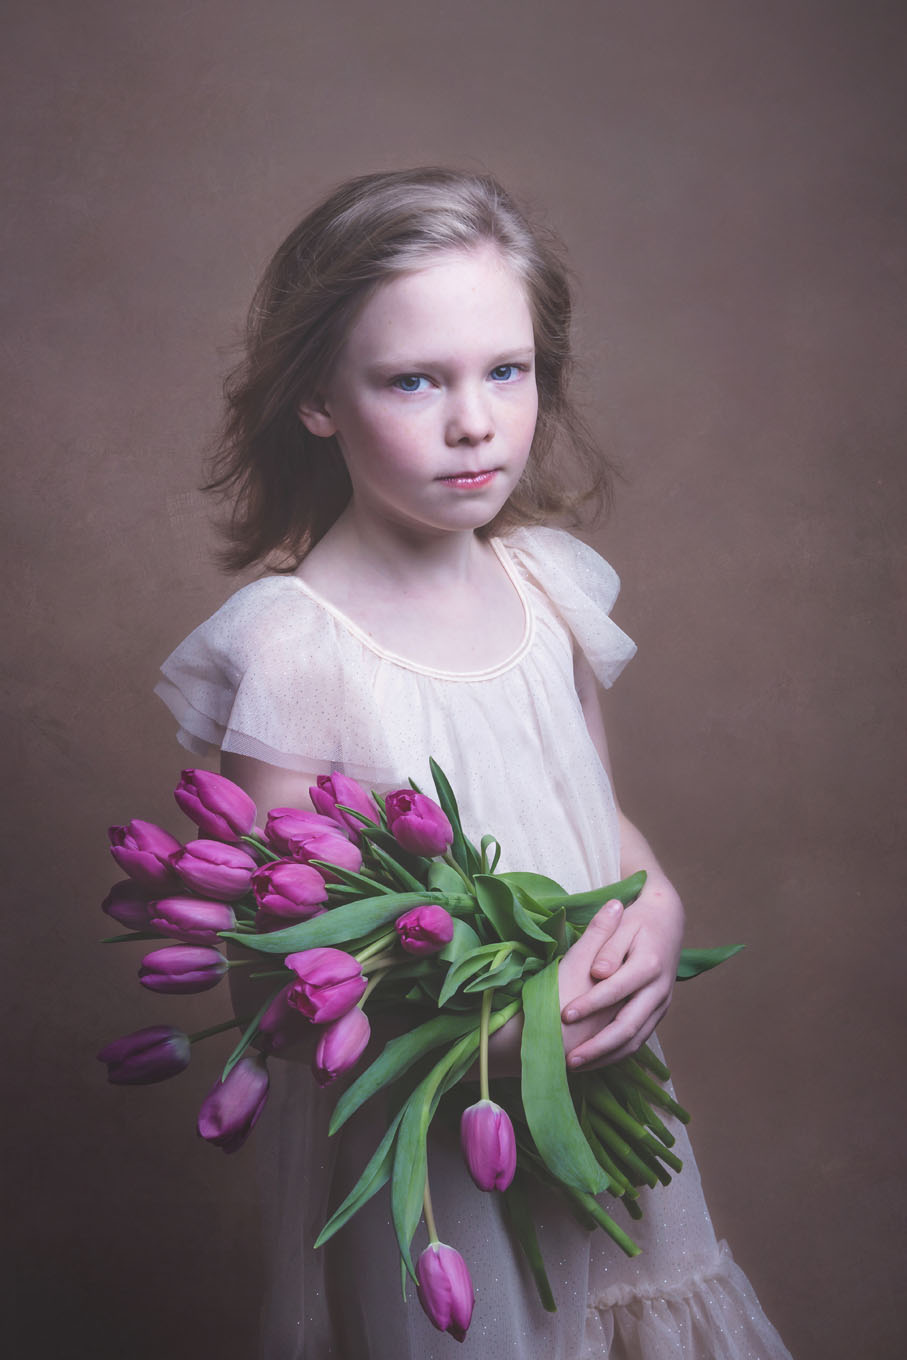 Portrait of a little girl in a studio with backdrop and lighting equipment